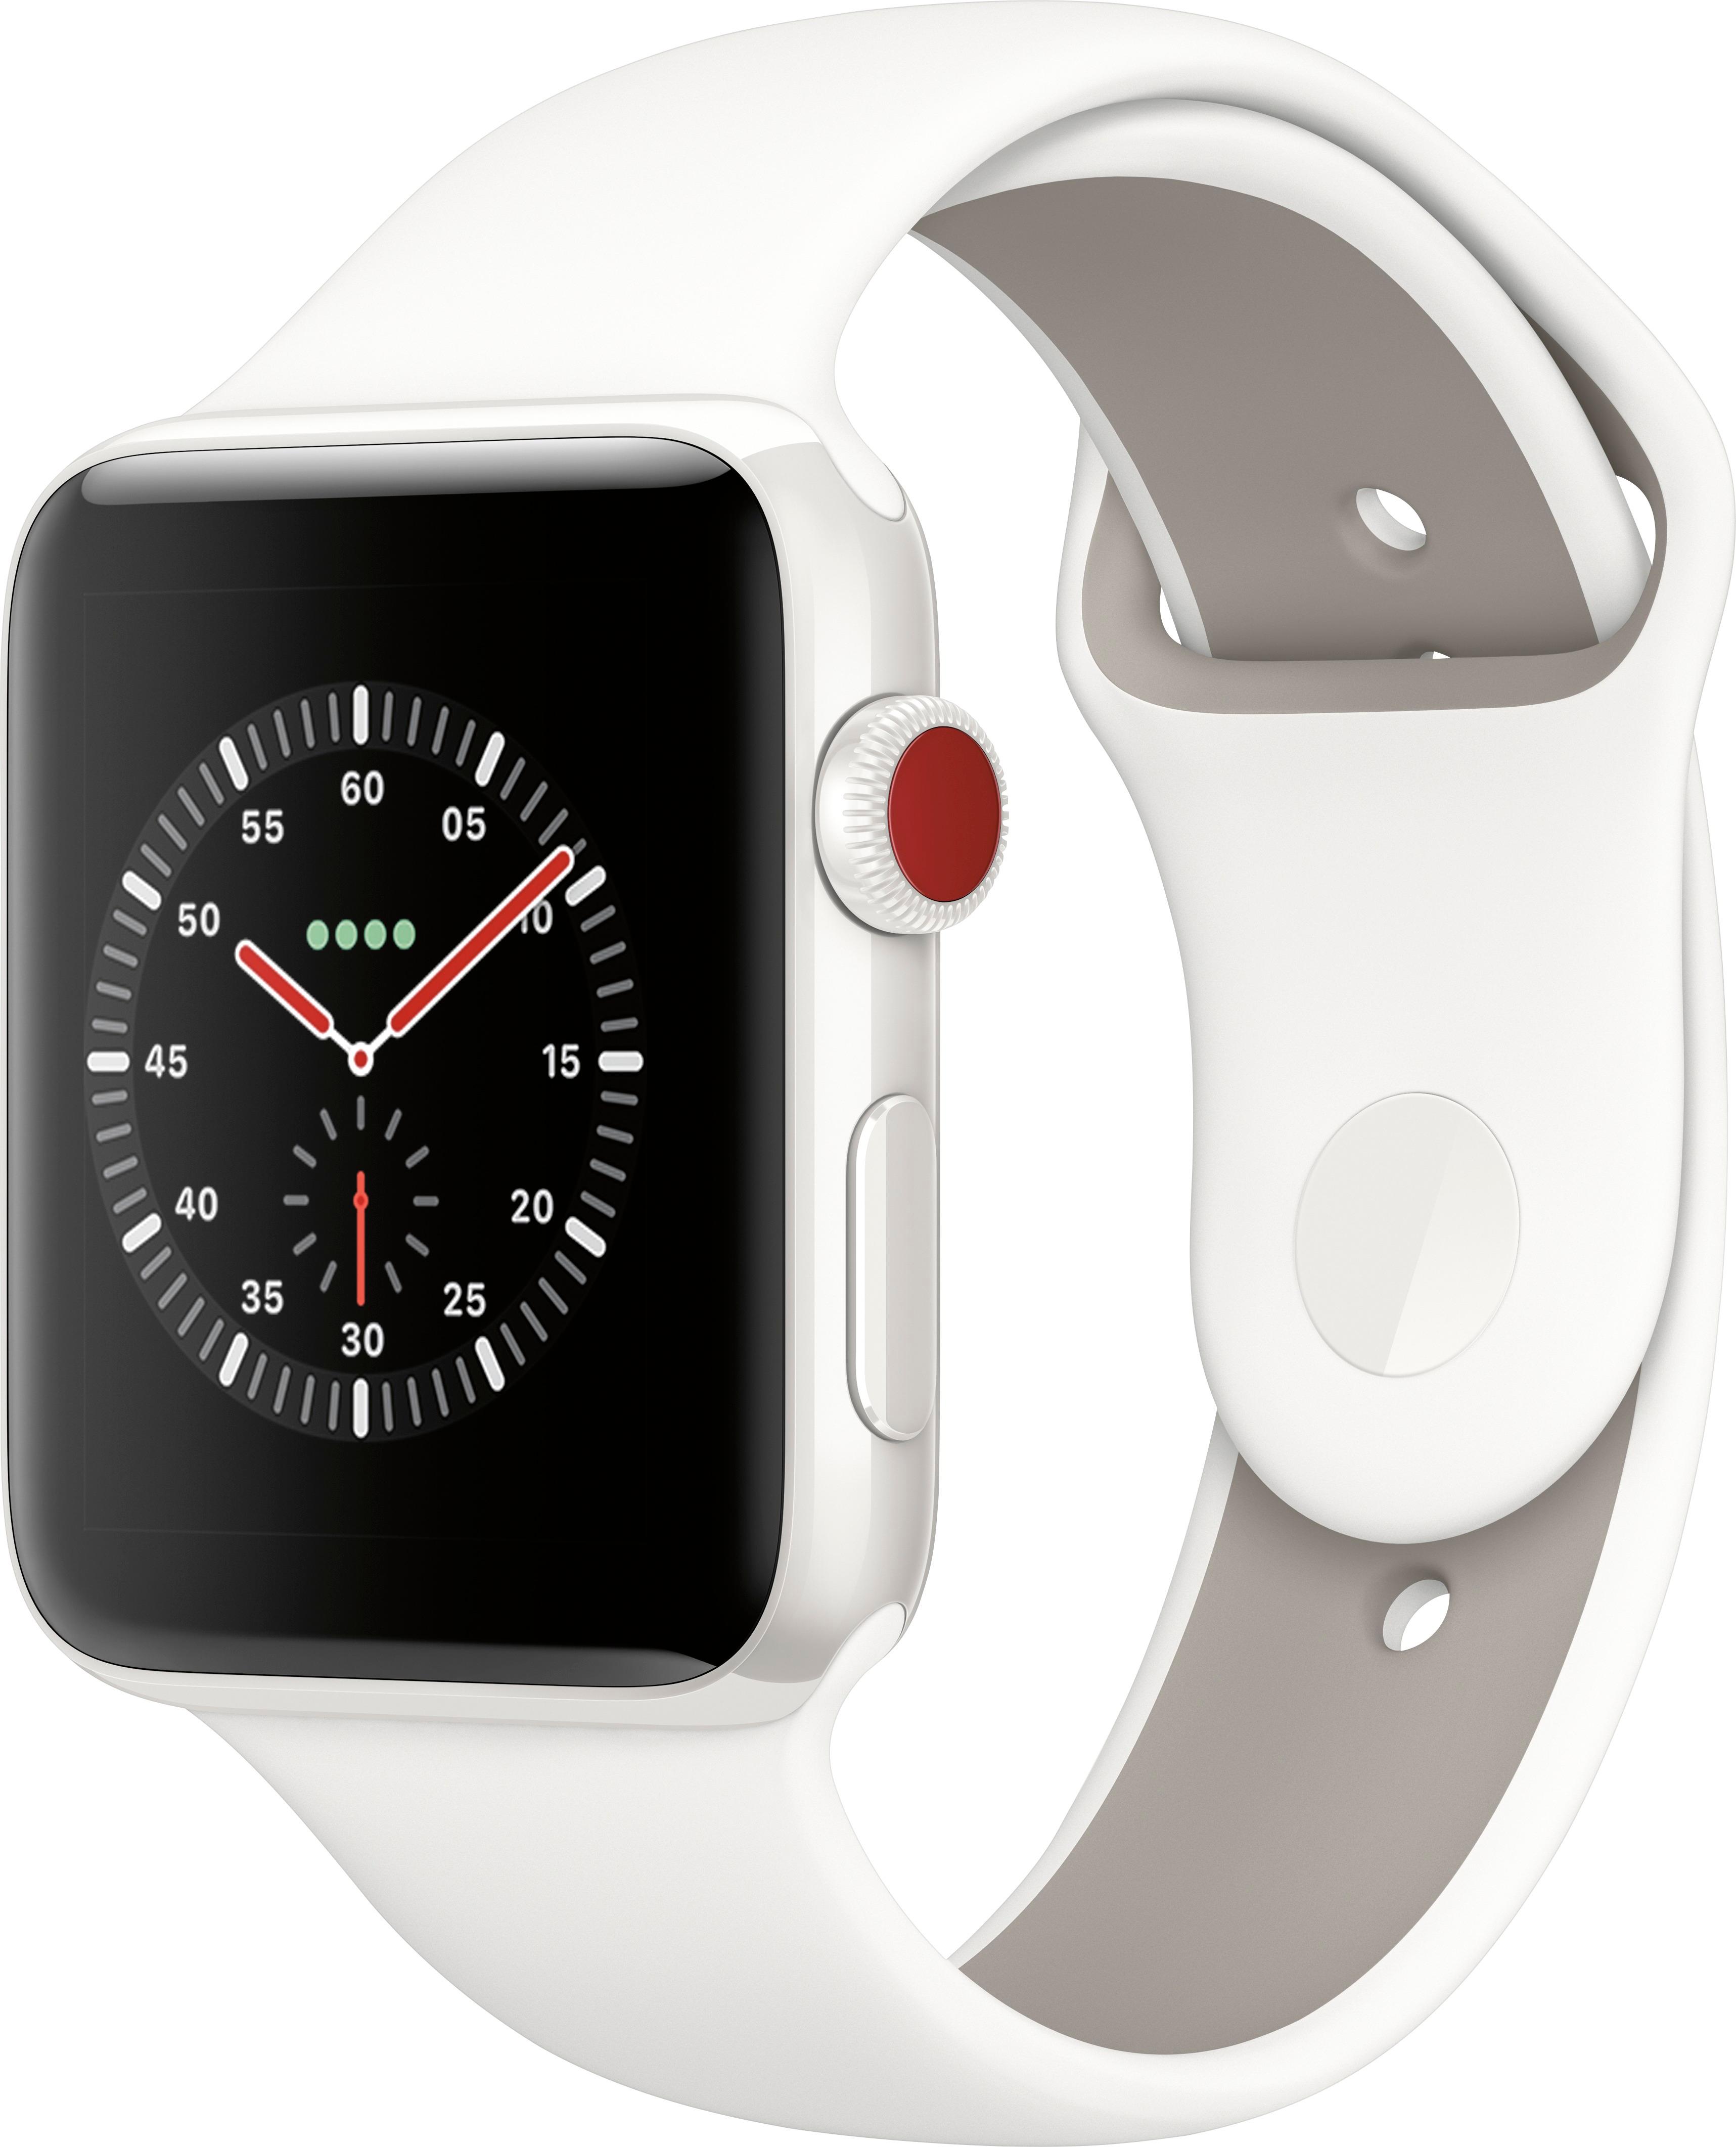 Angle View: Apple Watch Nike SE (GPS + Cellular) 40mm Silver Aluminum Case with Platinum/Black Nike Sport Band - Silver (AT&T)